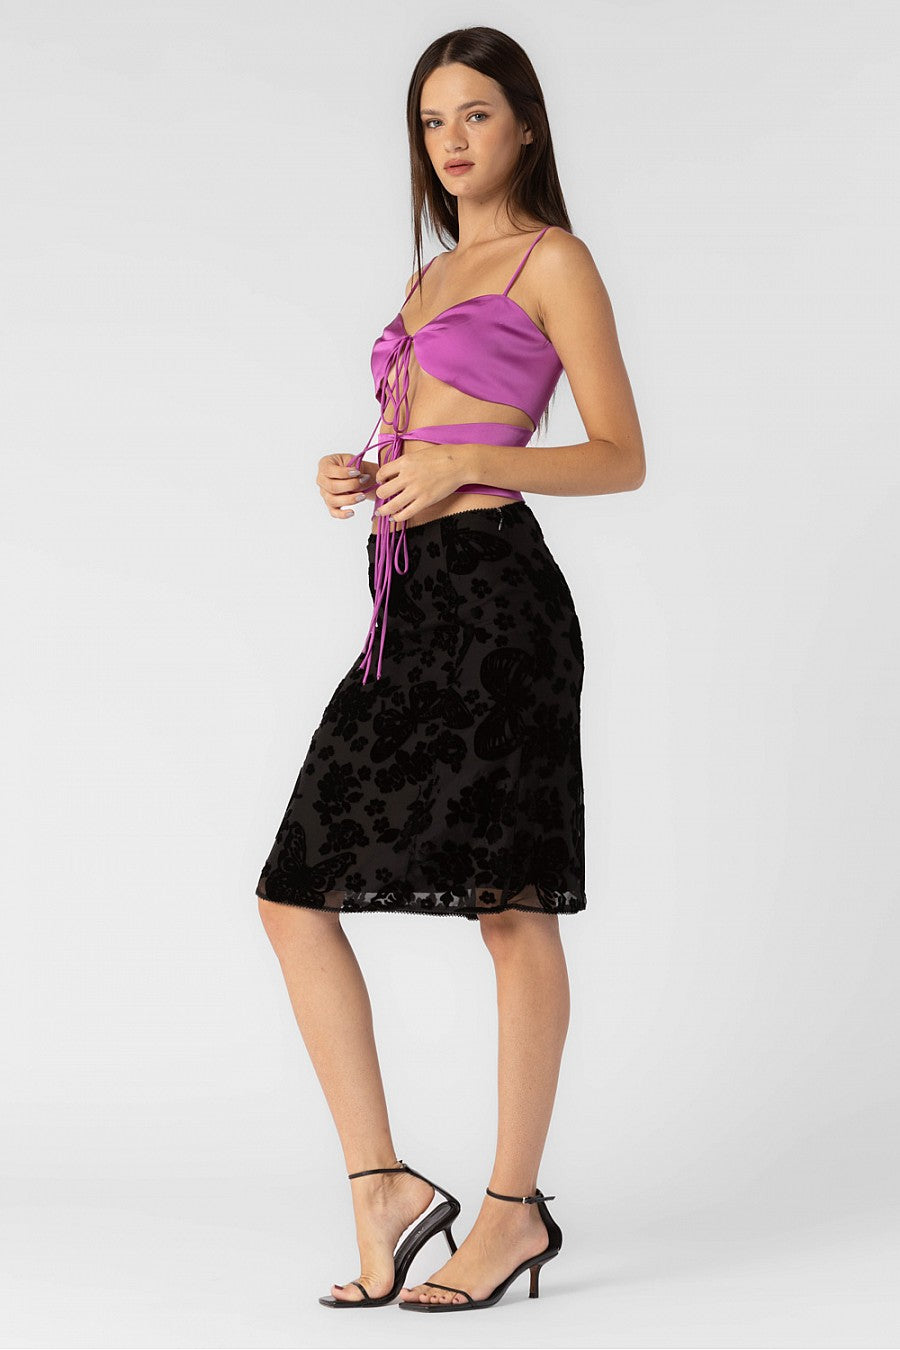 Satin spaghetti strap top with front cut-outs that tie in the front.